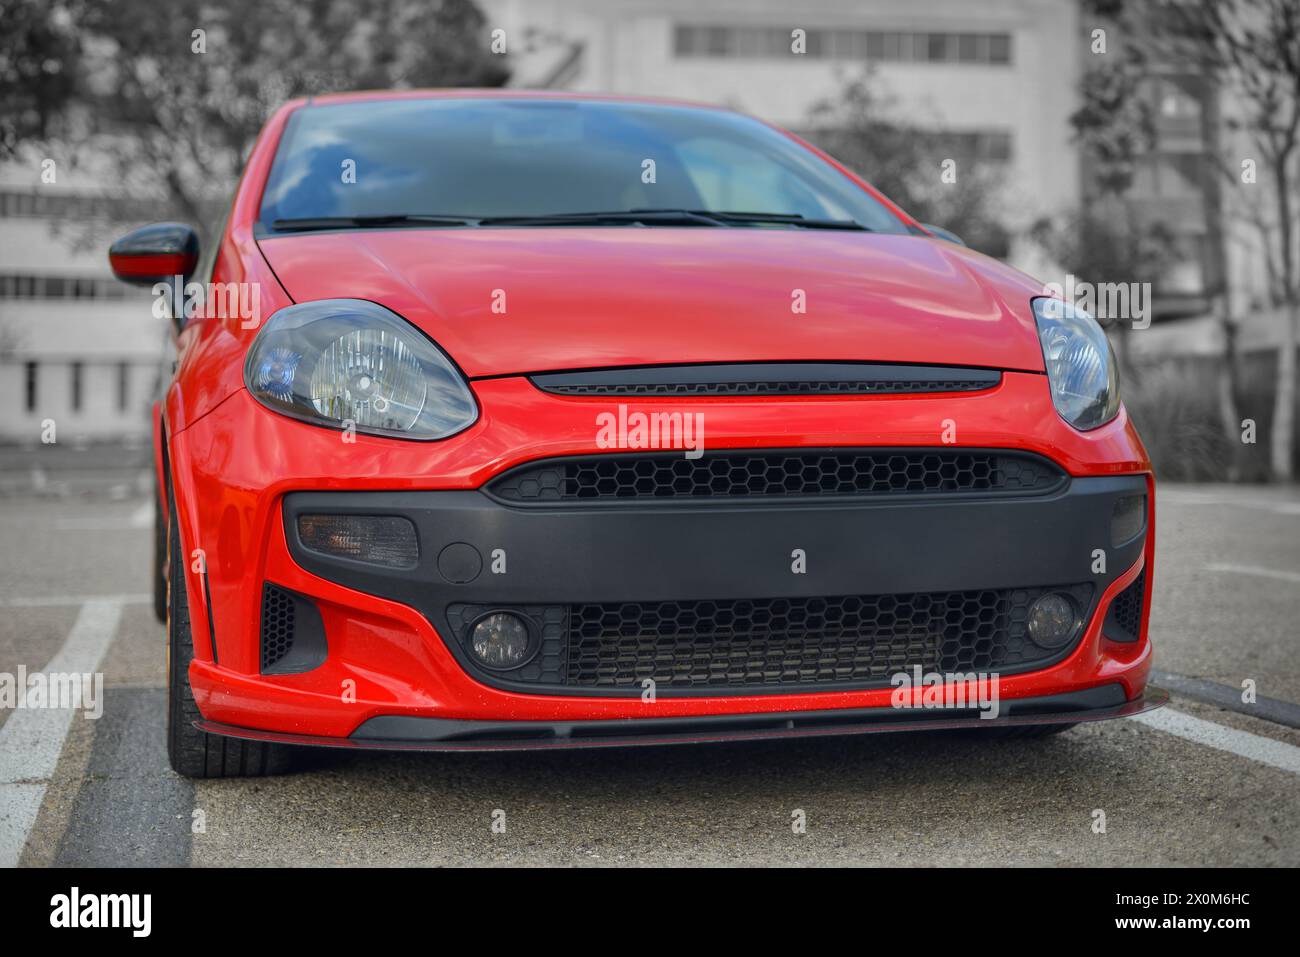 Red Italian hot hatch with a selective color of red Stock Photo